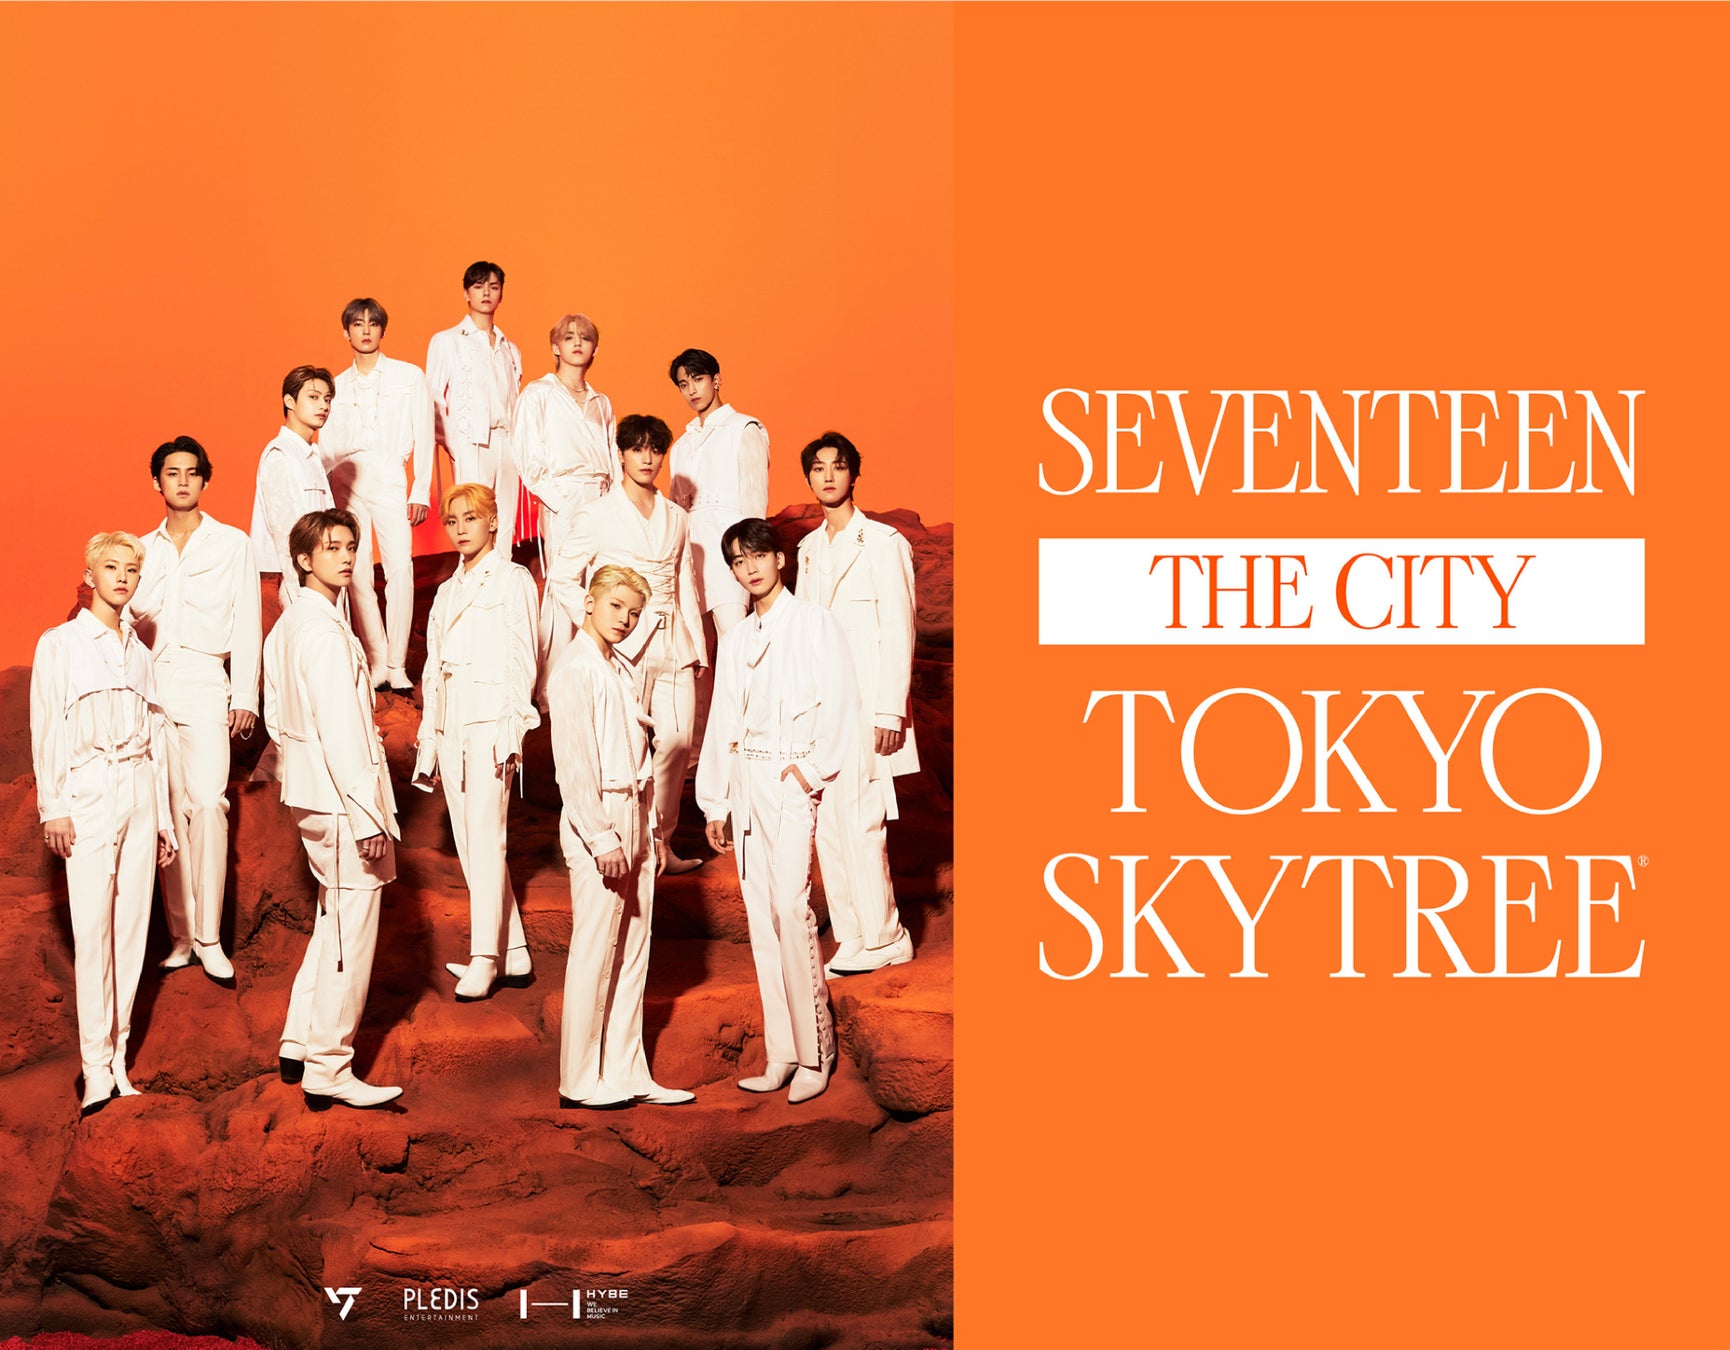 SEVENTEEN THE CITY TOKYO SKYTREE(R) イベント詳細が決定！